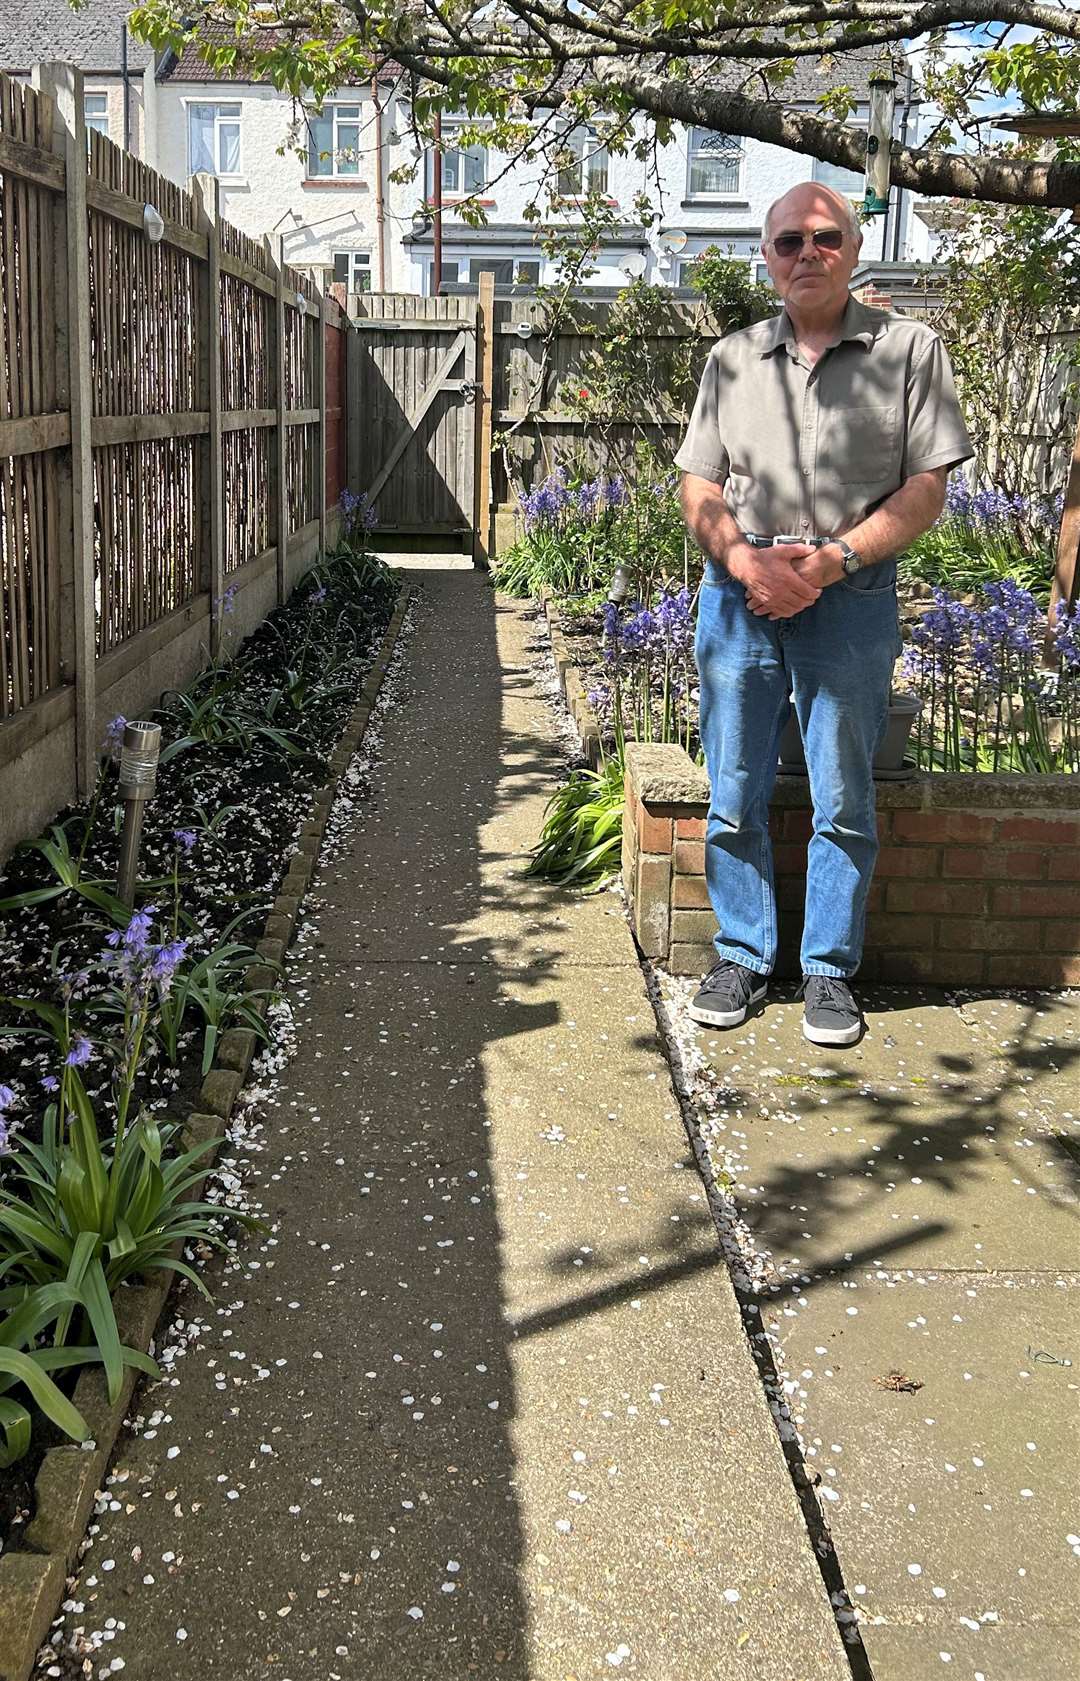 Alan Smyth is fighting for grant to make his garden accessible for his disabled wife